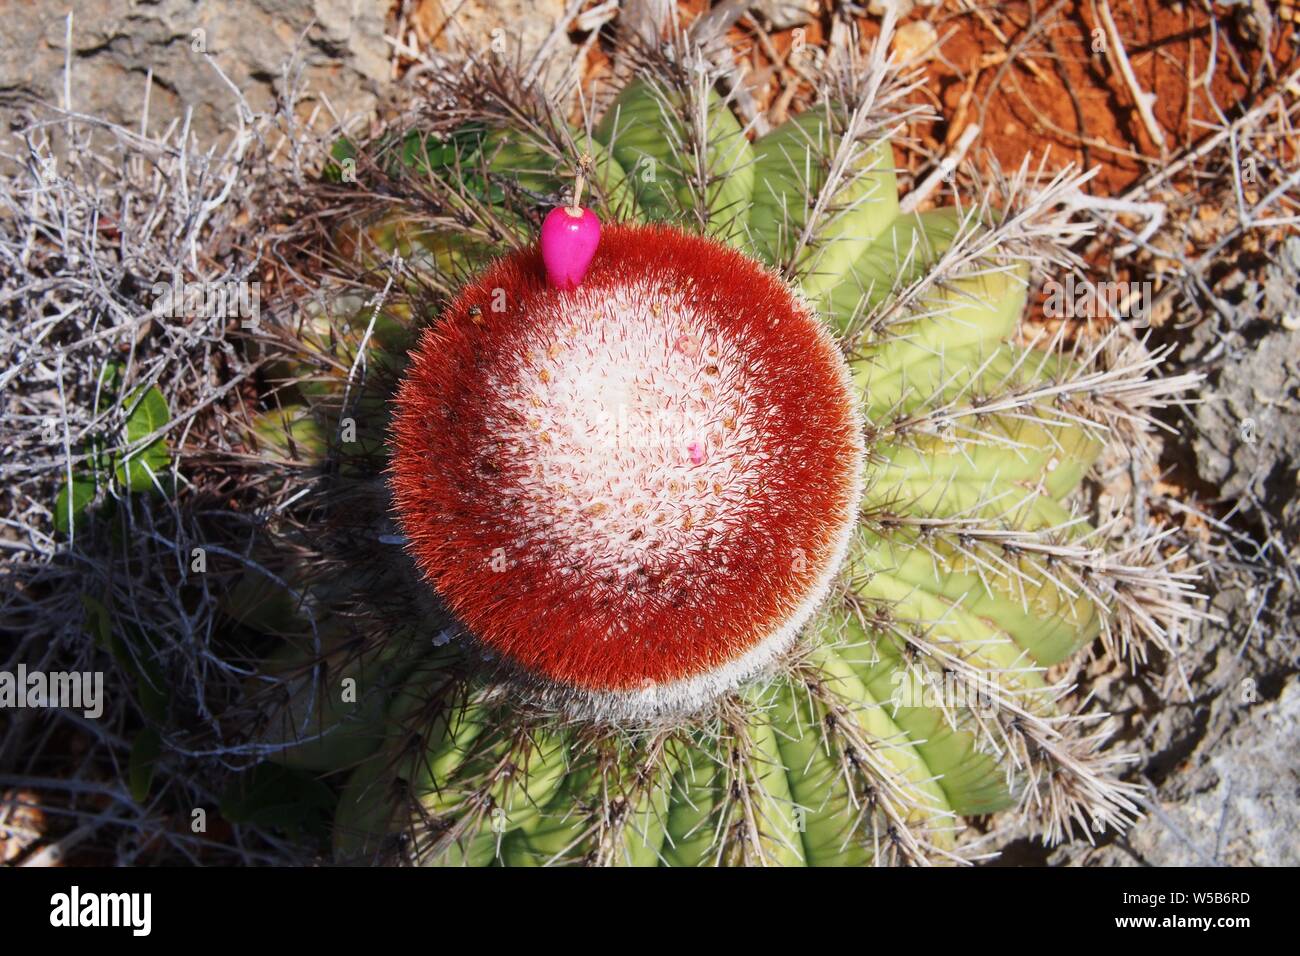 Top down view of a Pope’s Head Cactus (Melocactus intortus) sporting a bright pink cone-shaped fruit. Taste and consistency like Kiwi fruit. Stock Photo